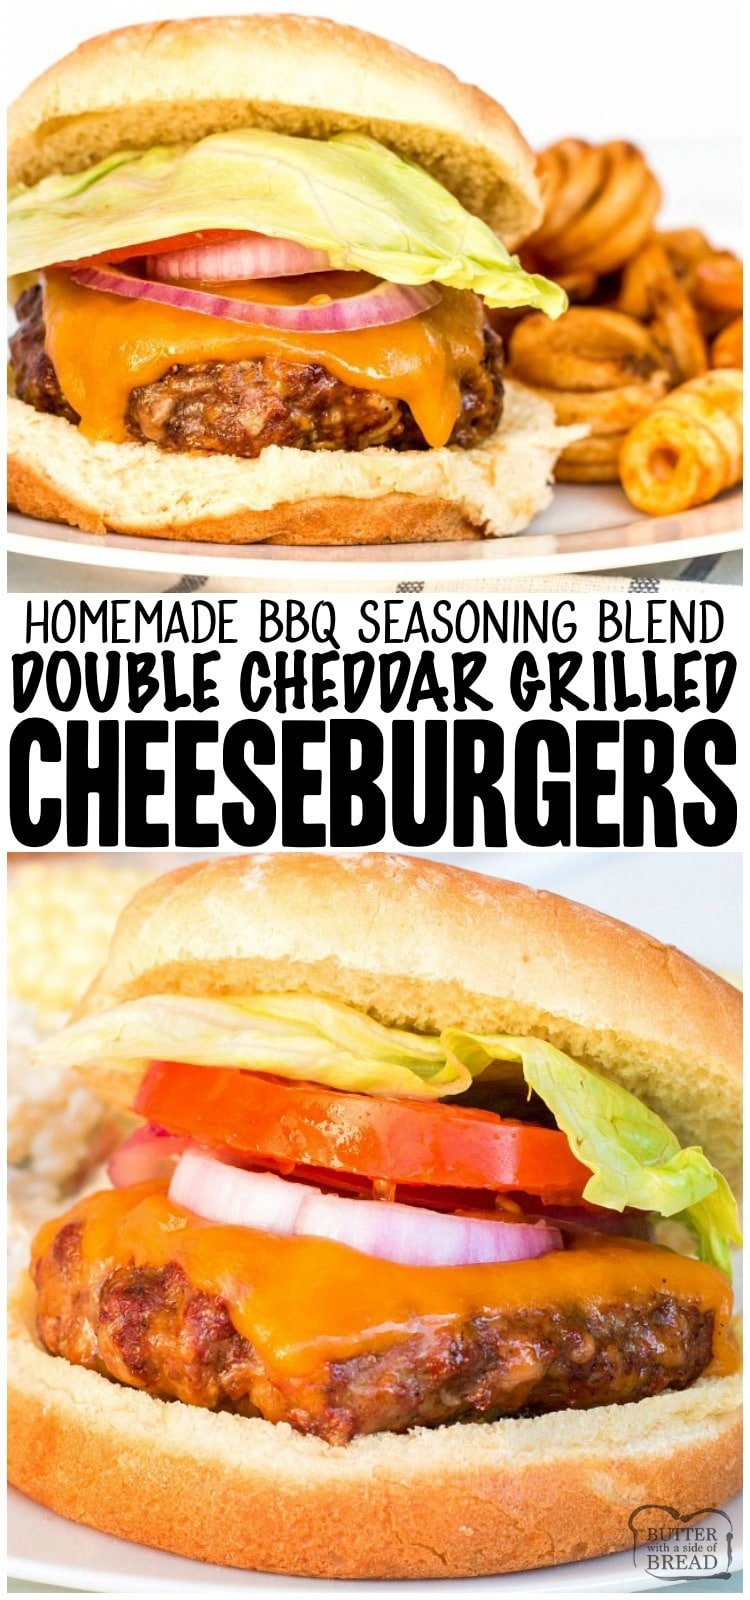 Easy Cheeseburgers are a delicious, lip smacking summertime BBQ staple at my house. With only four ingredients, this cheeseburger recipe is quick, easy and flavorful. #beef #cheese #burgers #cheeseburgers #grilling #bbq #recipe from BUTTER WITH A SIDE OF BREAD